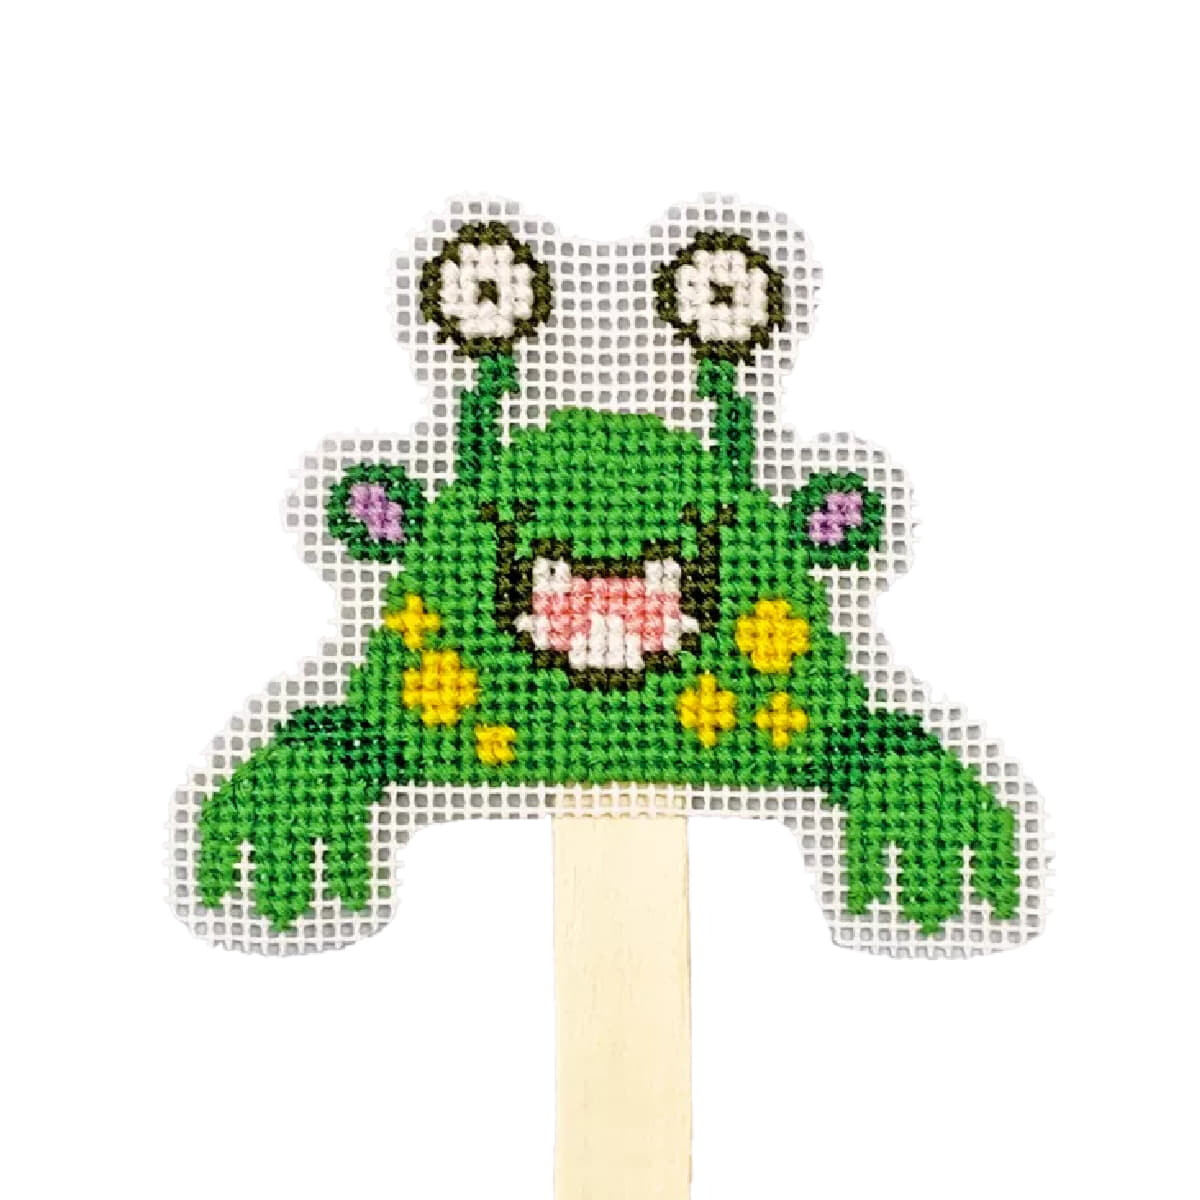 A cross-stitched frog puppet on a stick, or embroidery...